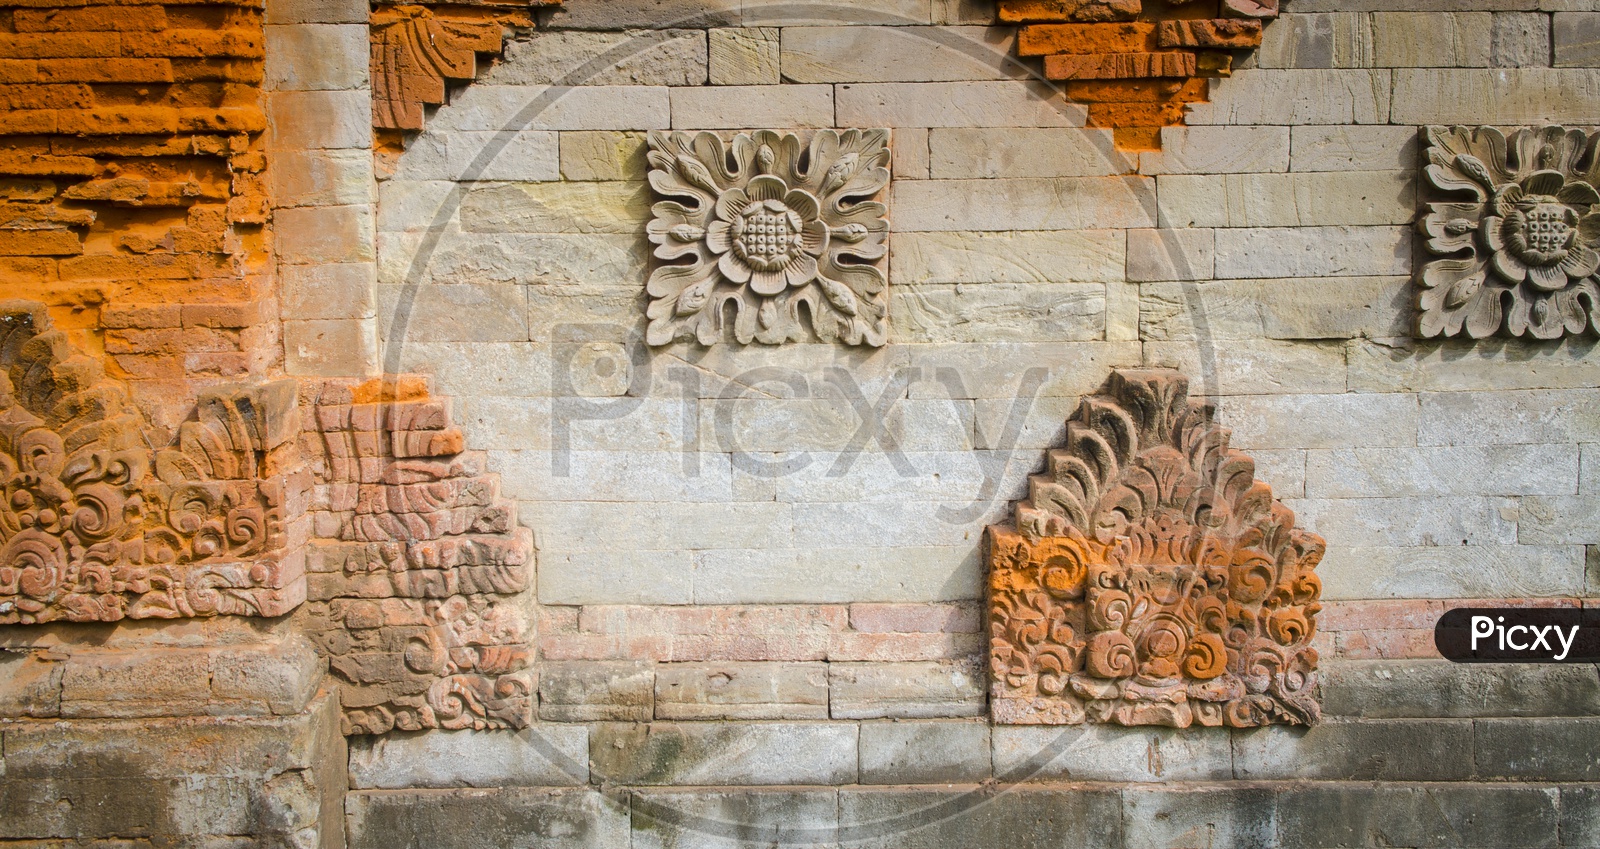 Stone carvings on the ancient wall in Thailand